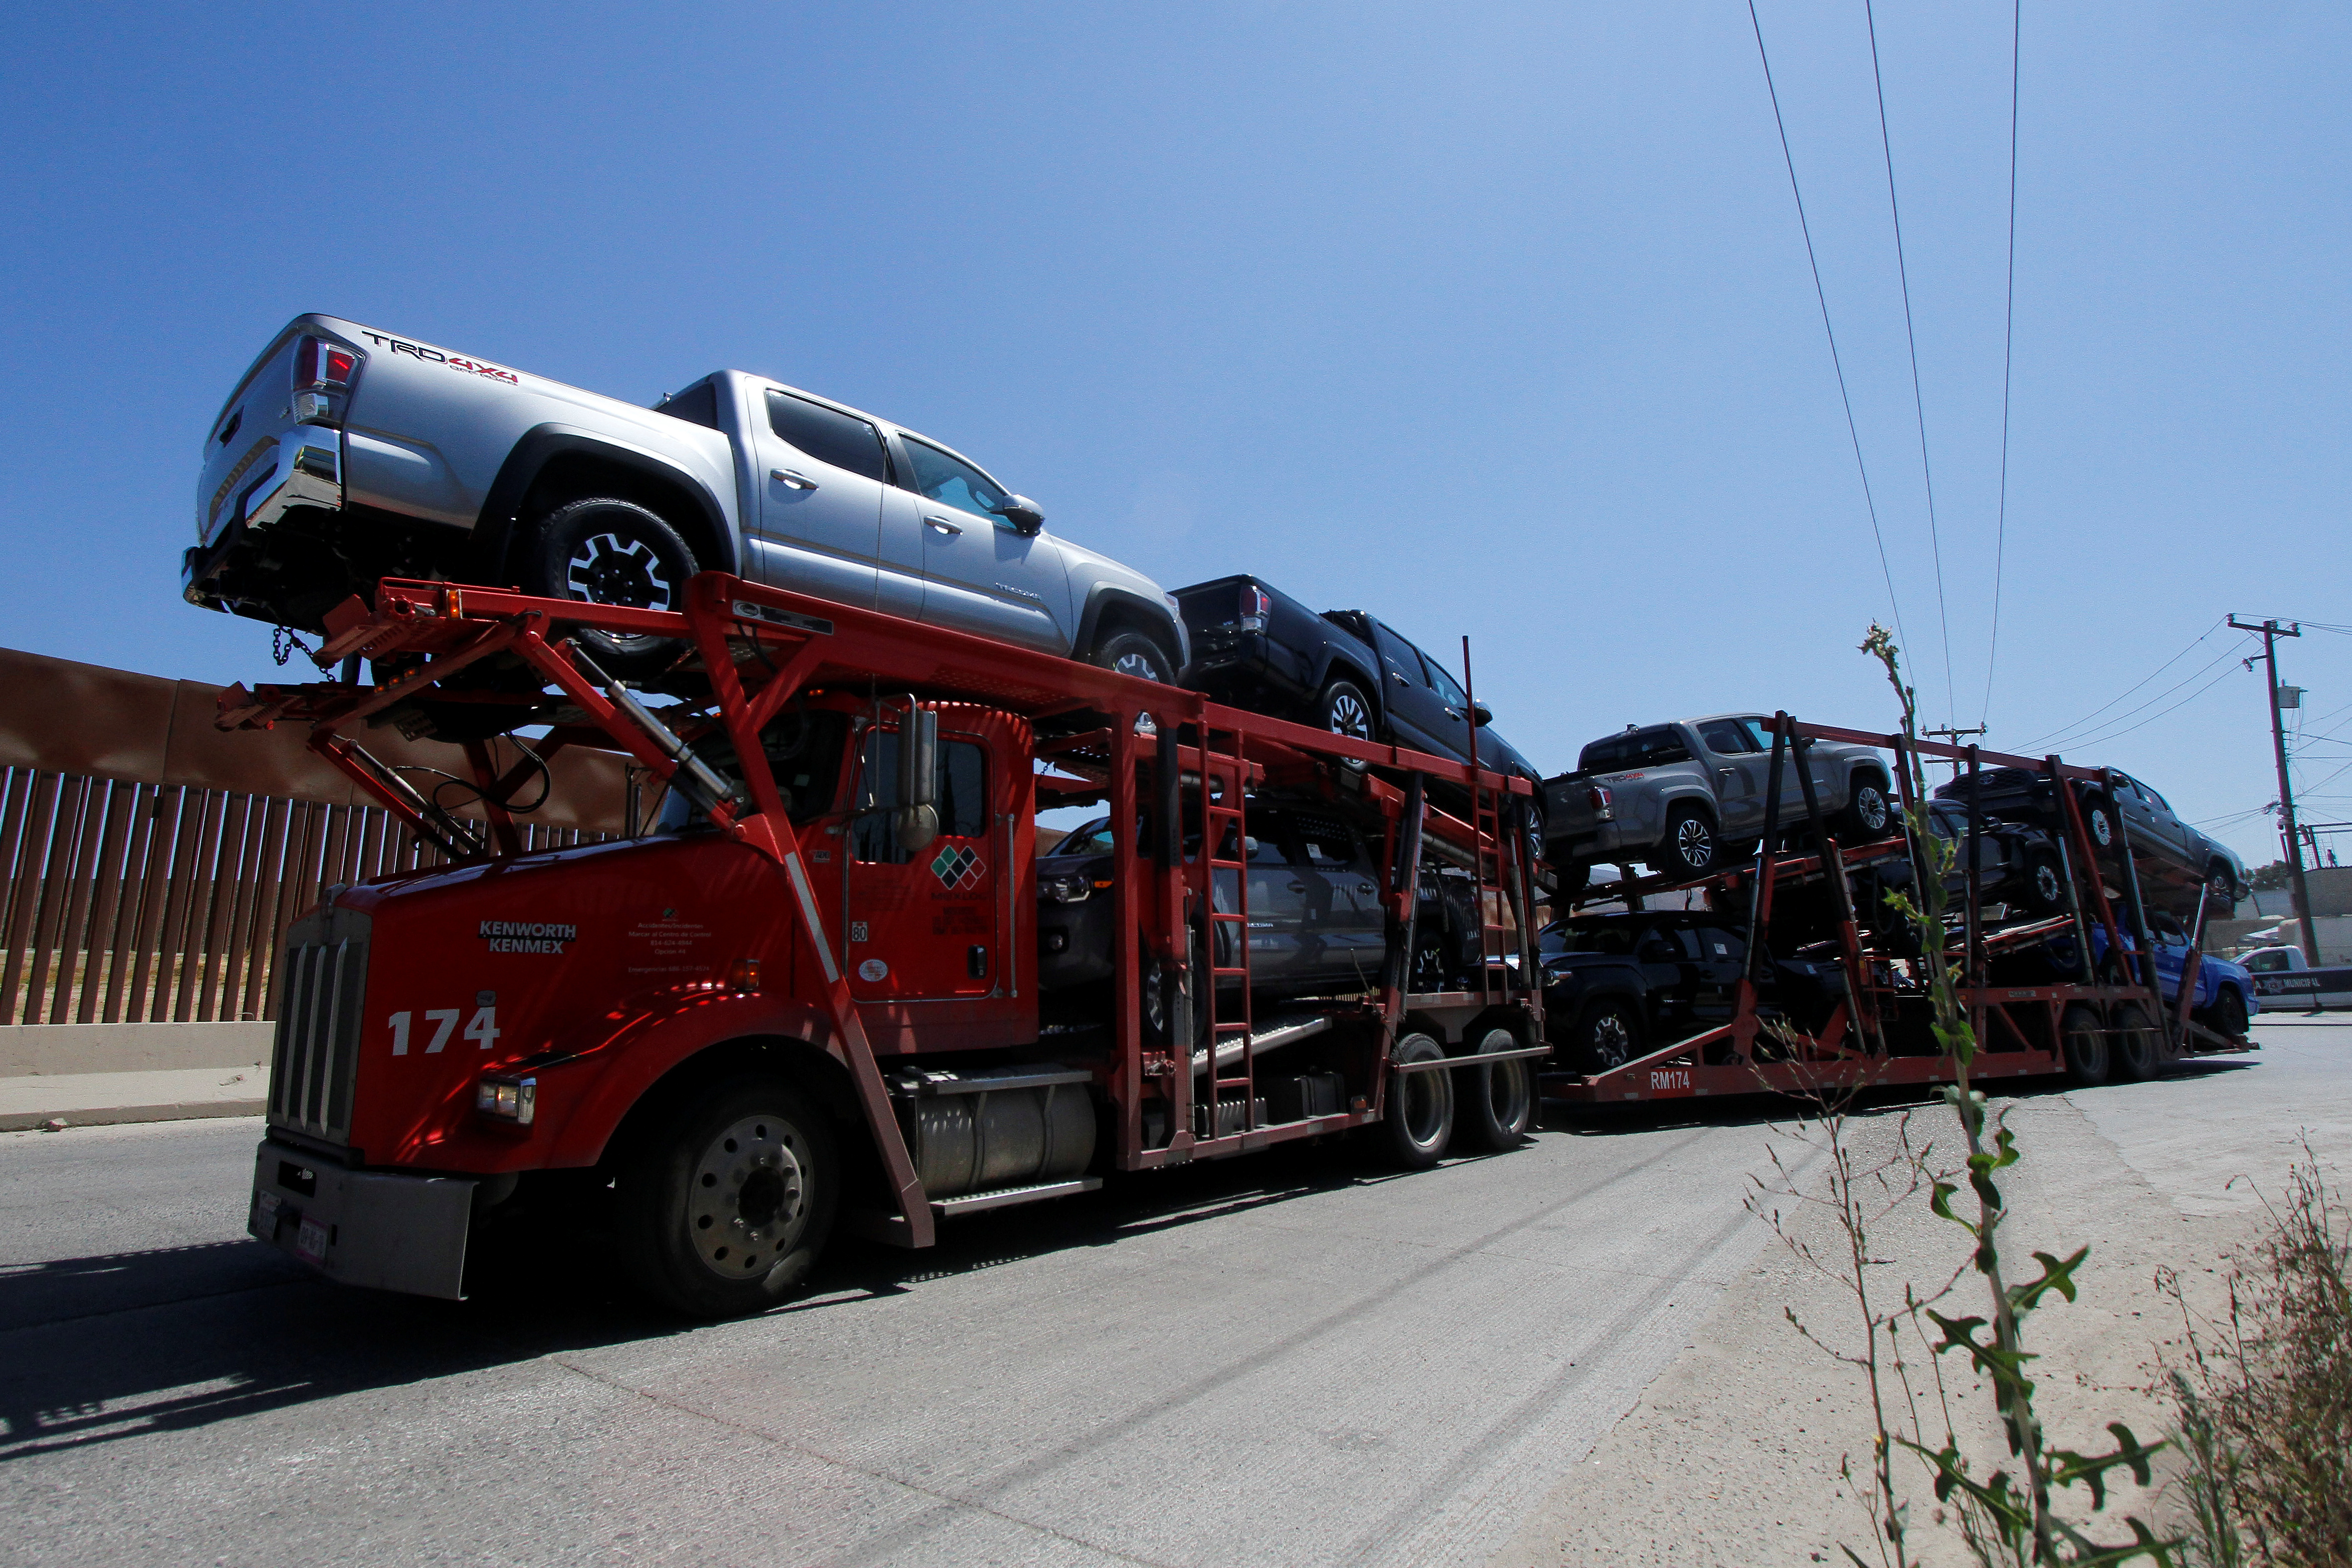 A carrier trailer transports Toyota vehicles for delivery while queuing at the border for customs control to cross into the U.S., at the Otay border crossing in Tijuana